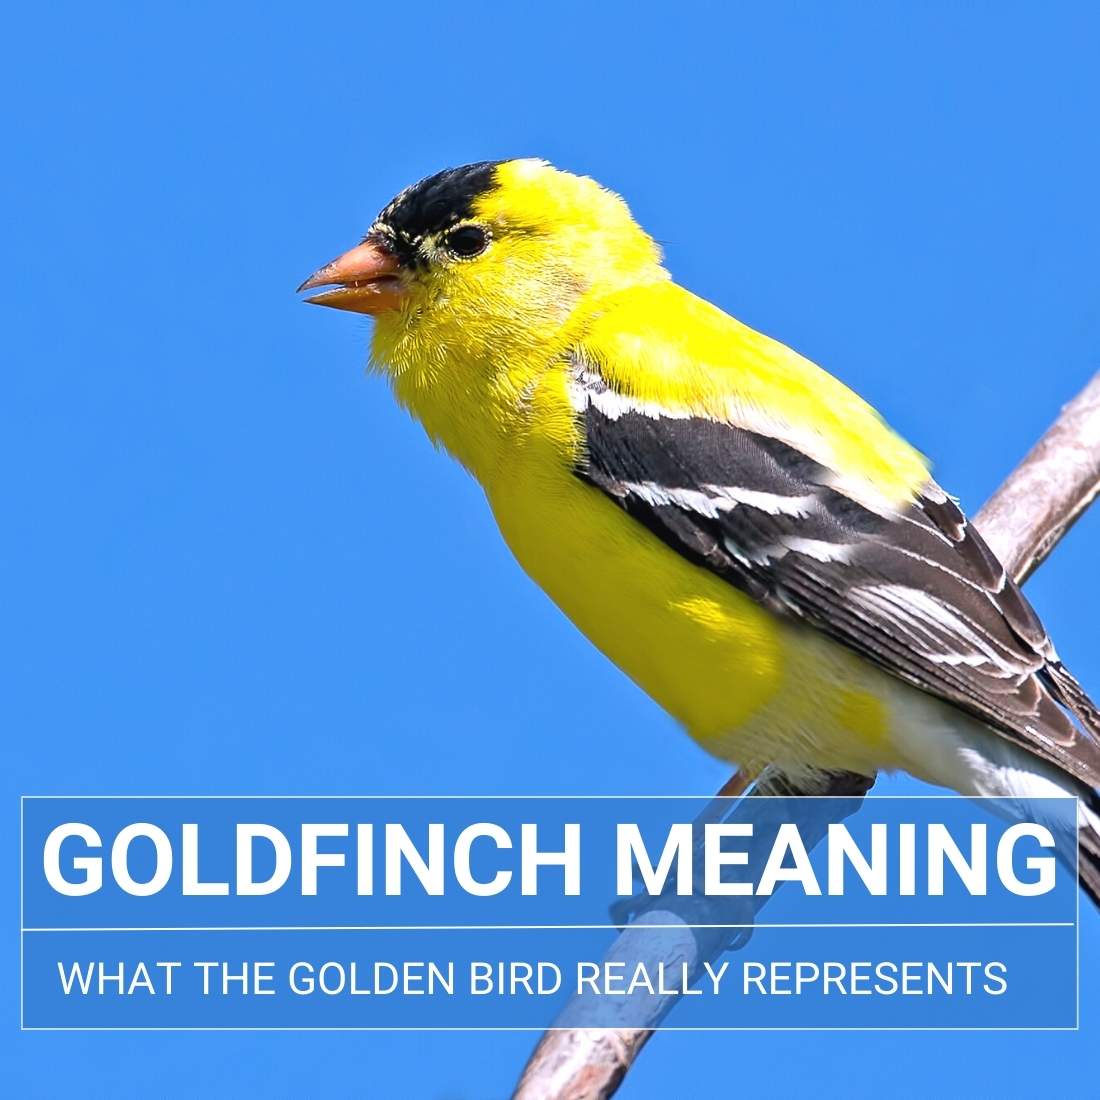 Goldfinch Meaning